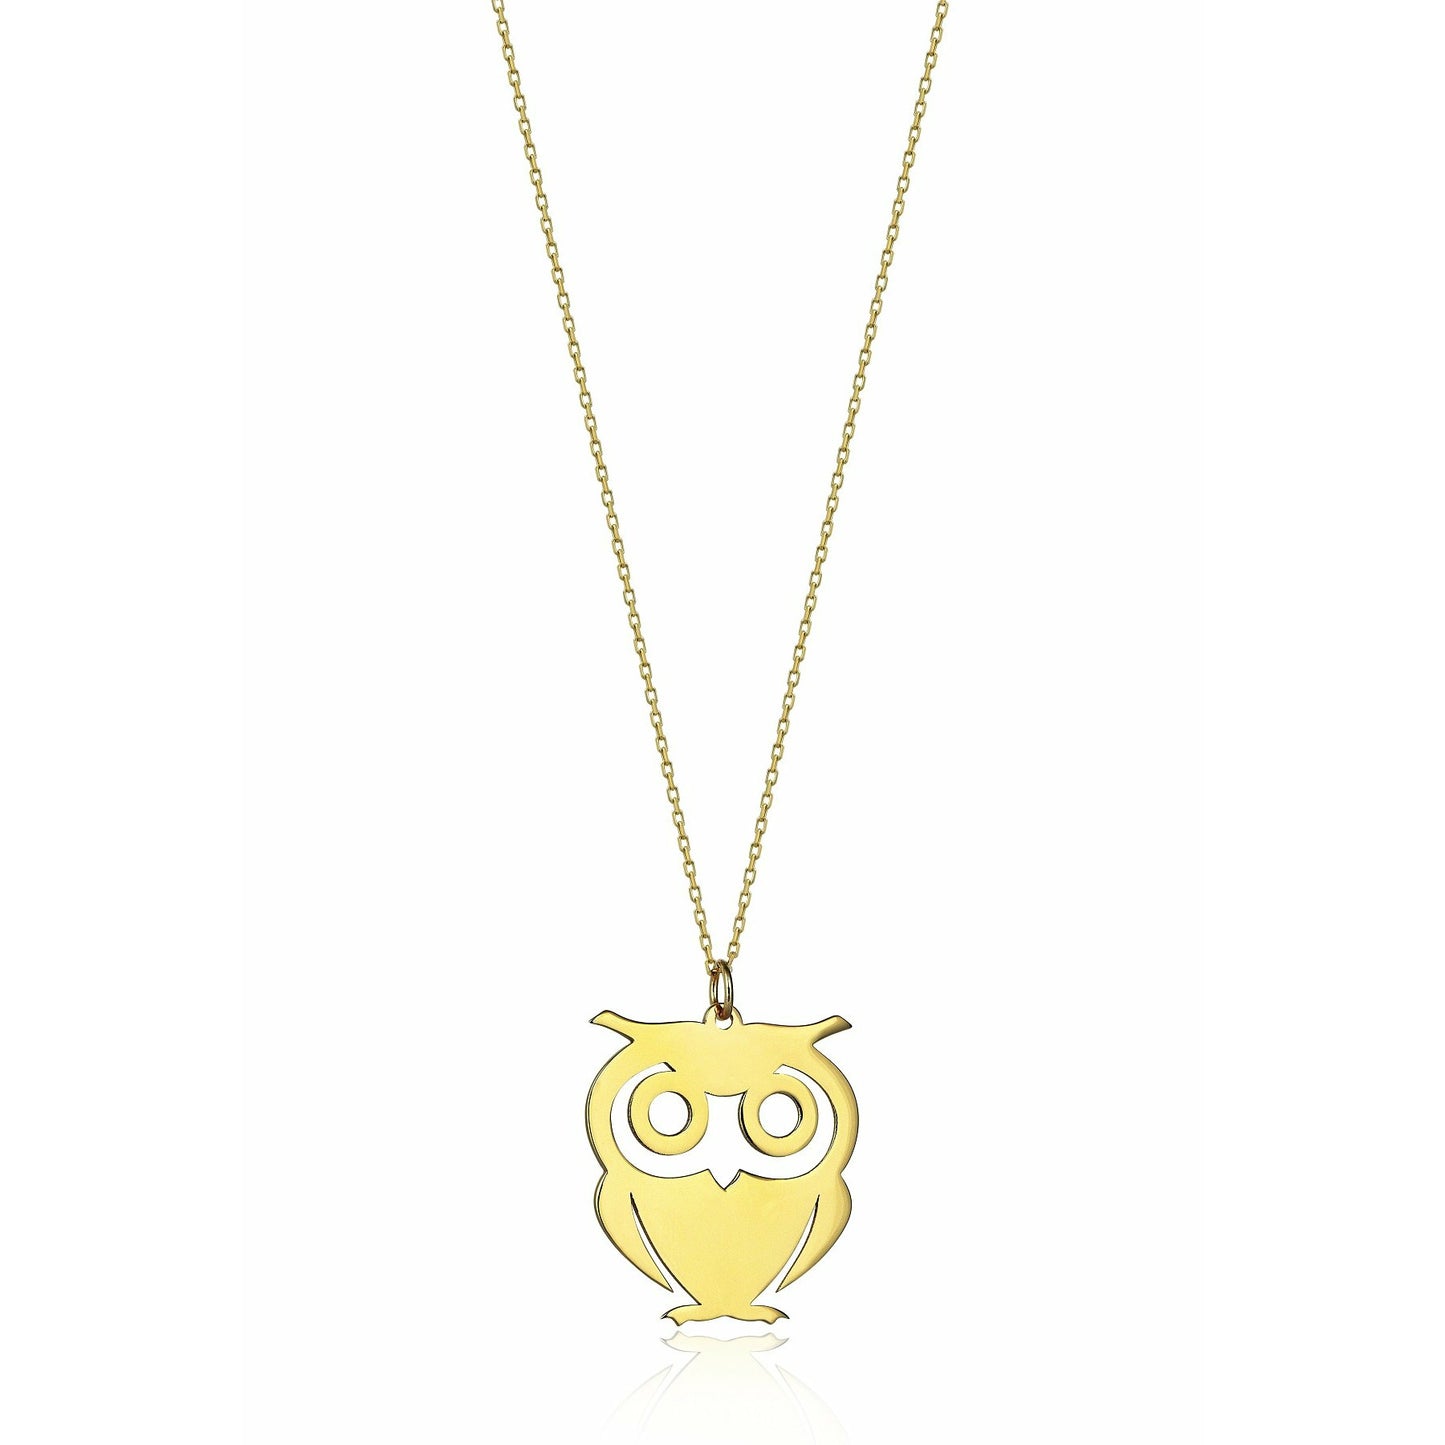 Special Design Gift 14k Gold Winged Owl Necklace 